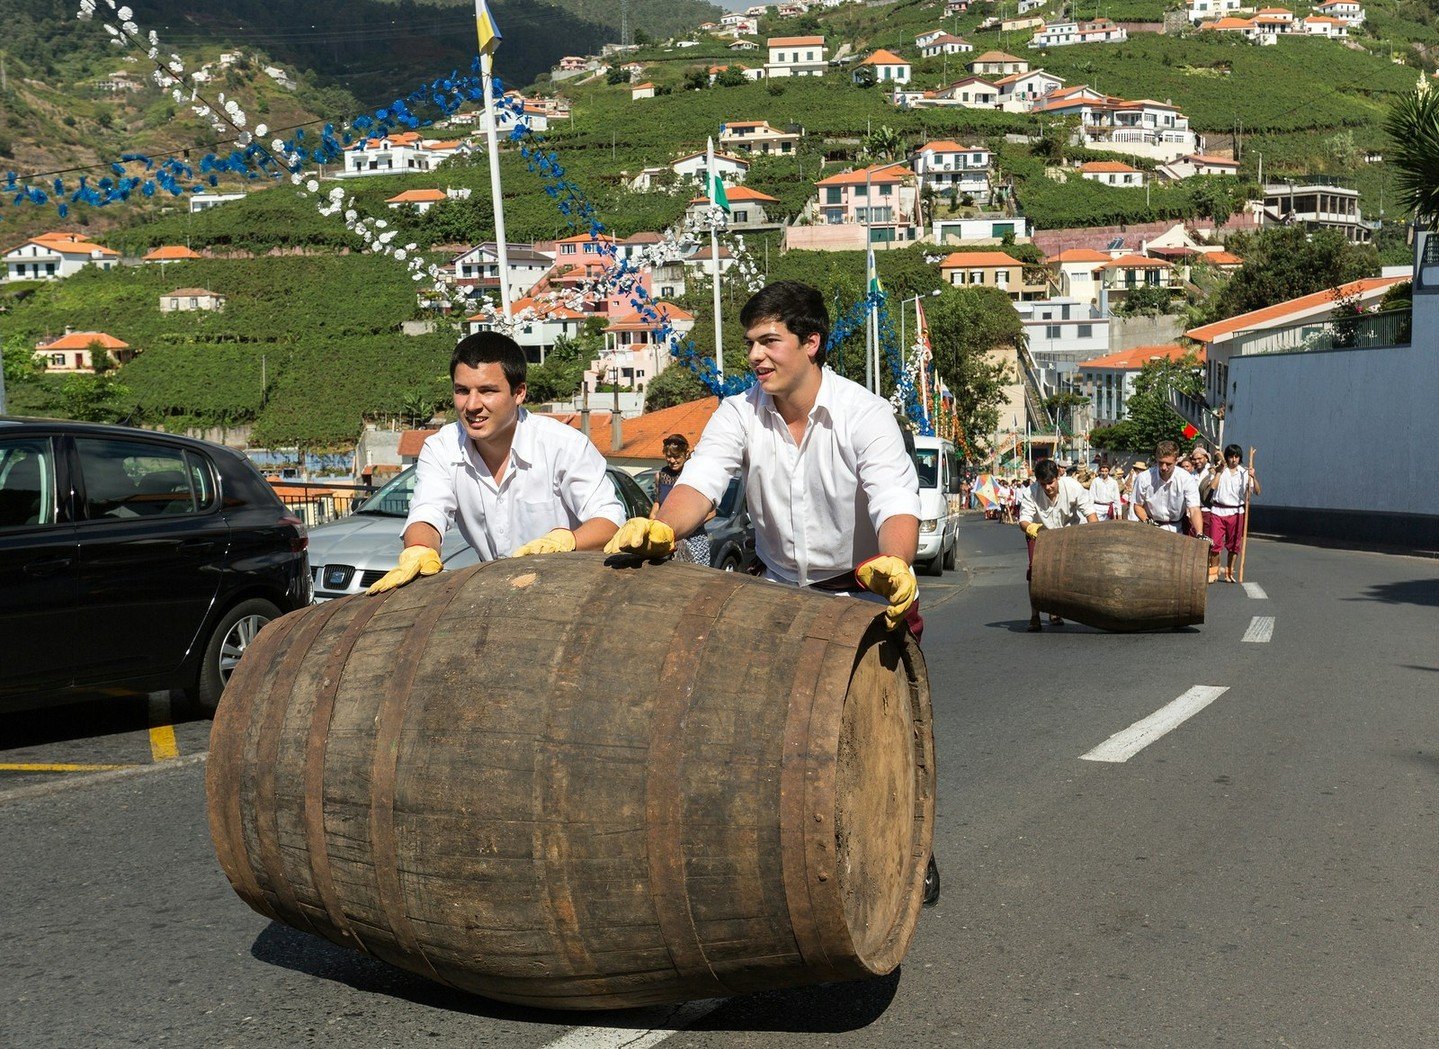 Interested in sipping and savoring at the Madeira Wine Festival in Portugal from August 25th to September 15th? You&rsquo;ll enjoy traditional grape treading, lively street parades, and exquisite wine tastings. It's a feast for the senses within a br